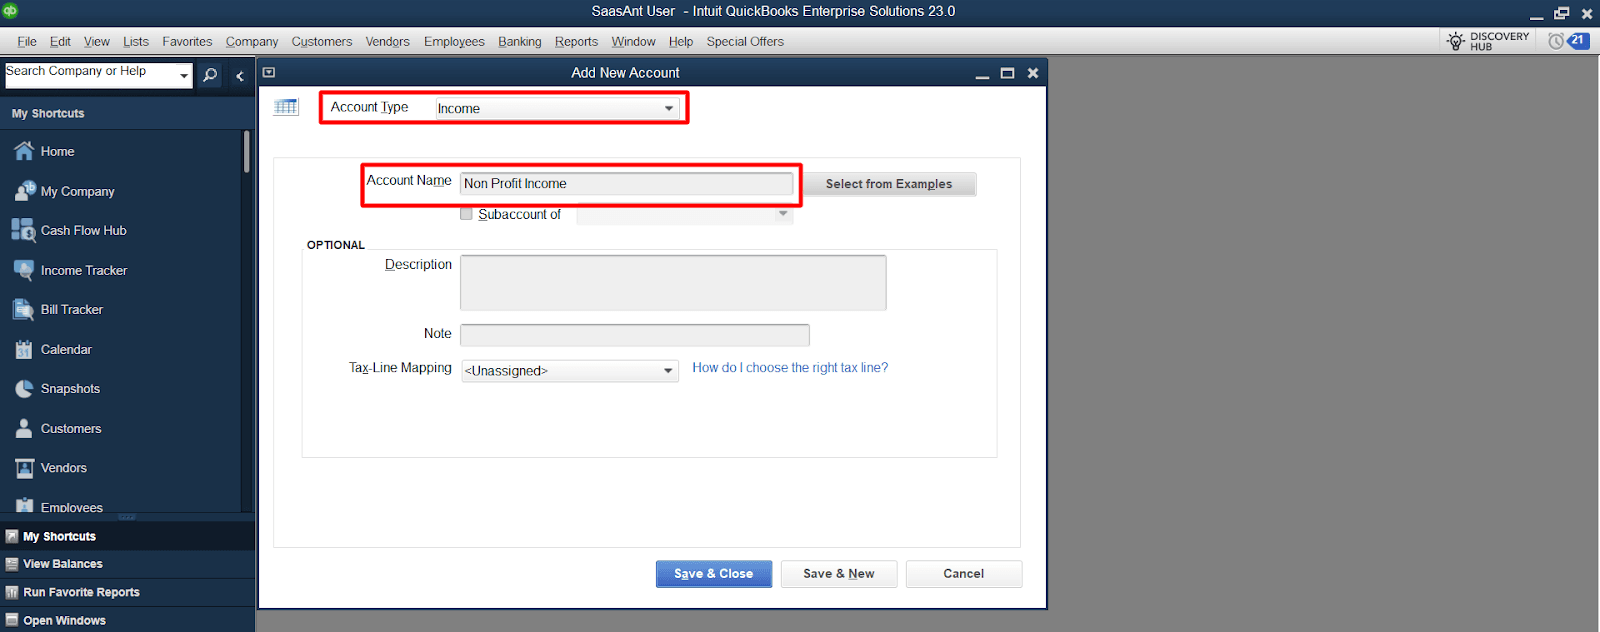 You can add a new name or select an existing account name by clicking the ‘Select from Examples’ button.